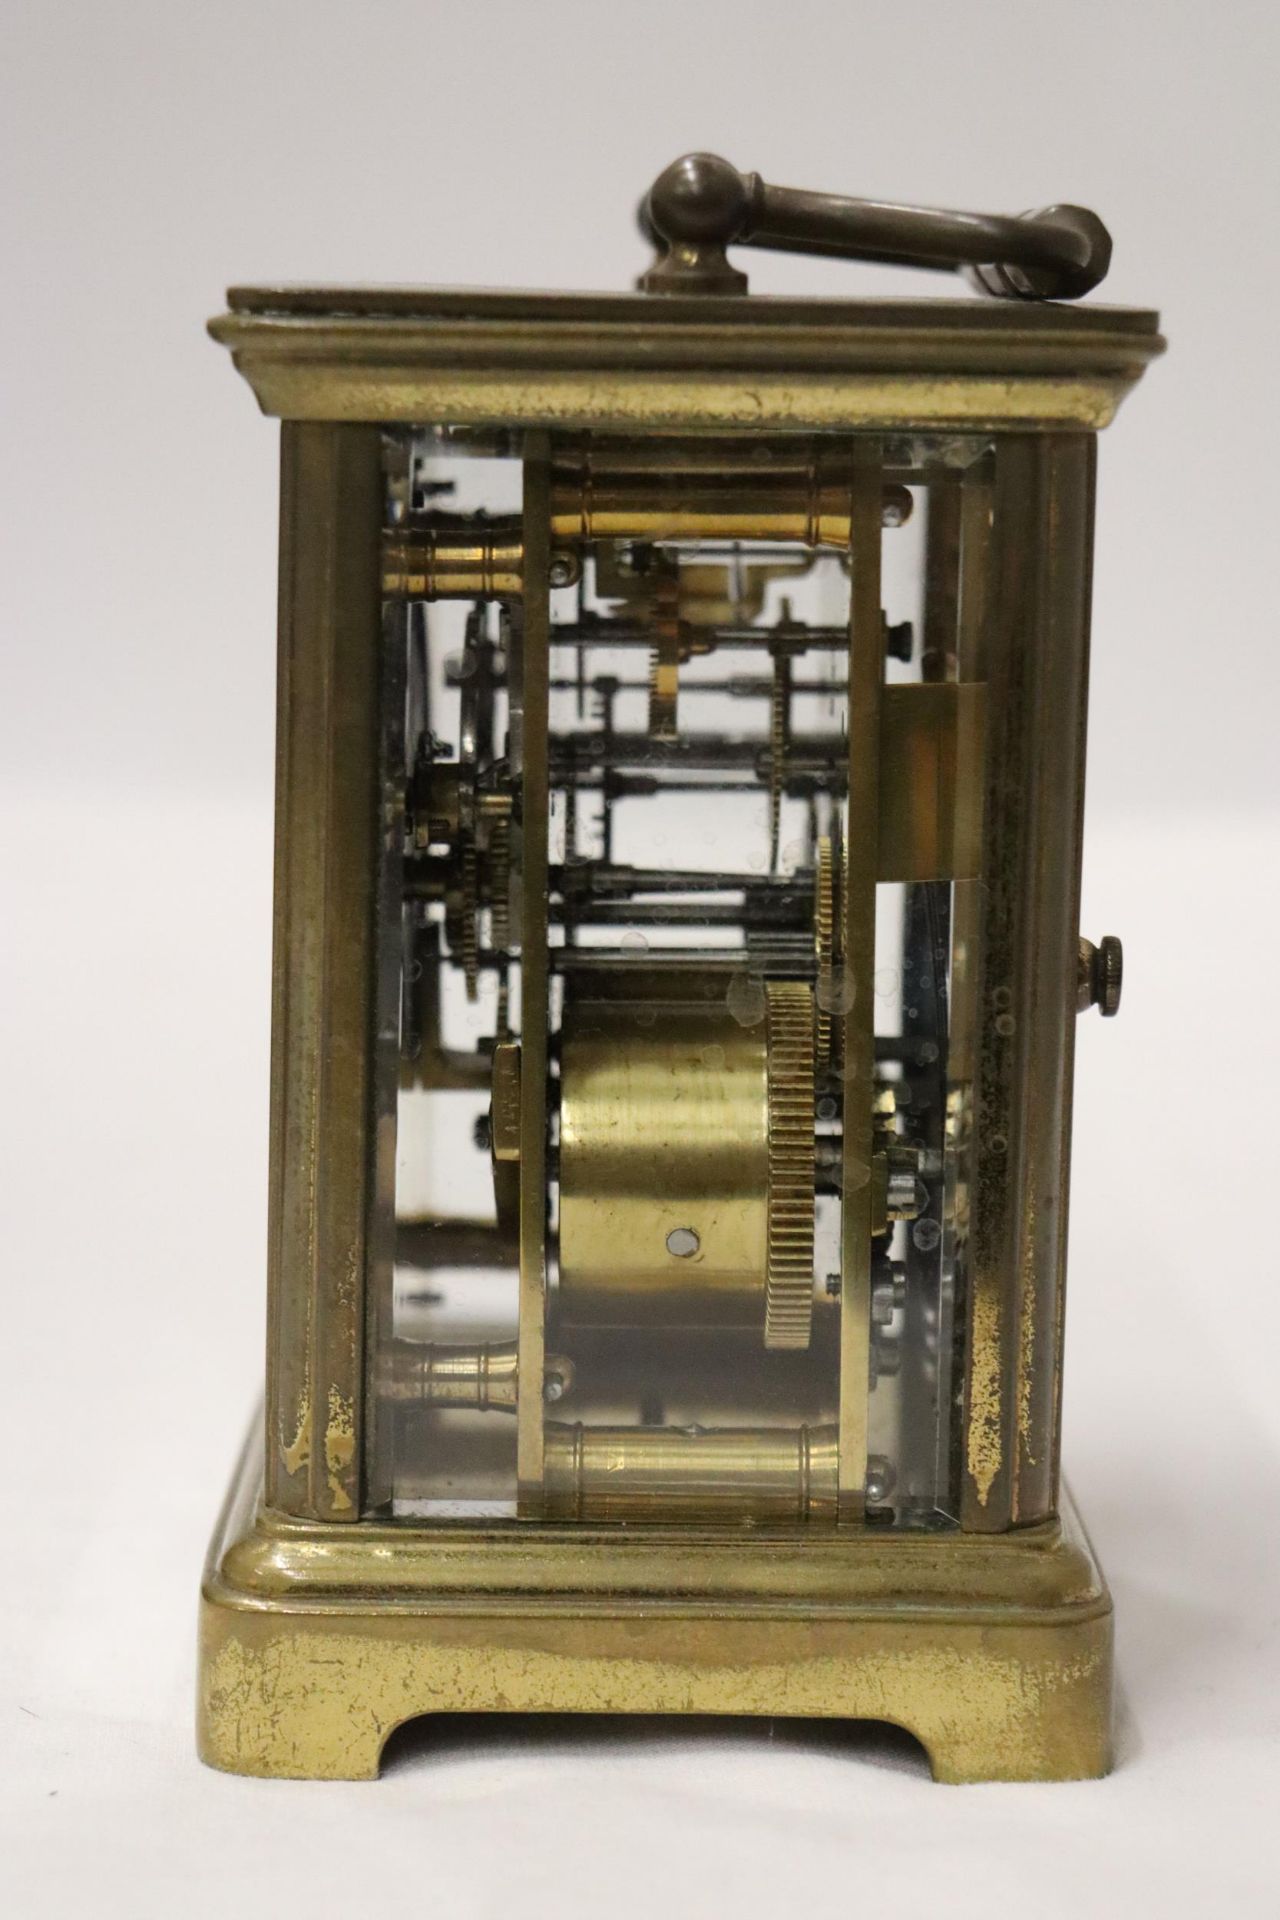 A VINTAGE BRASS ALARM CLOCK WITH GLASS SIDES TO SHOW INNER WORKINGS, IN A LEATHER CASE - Image 8 of 11